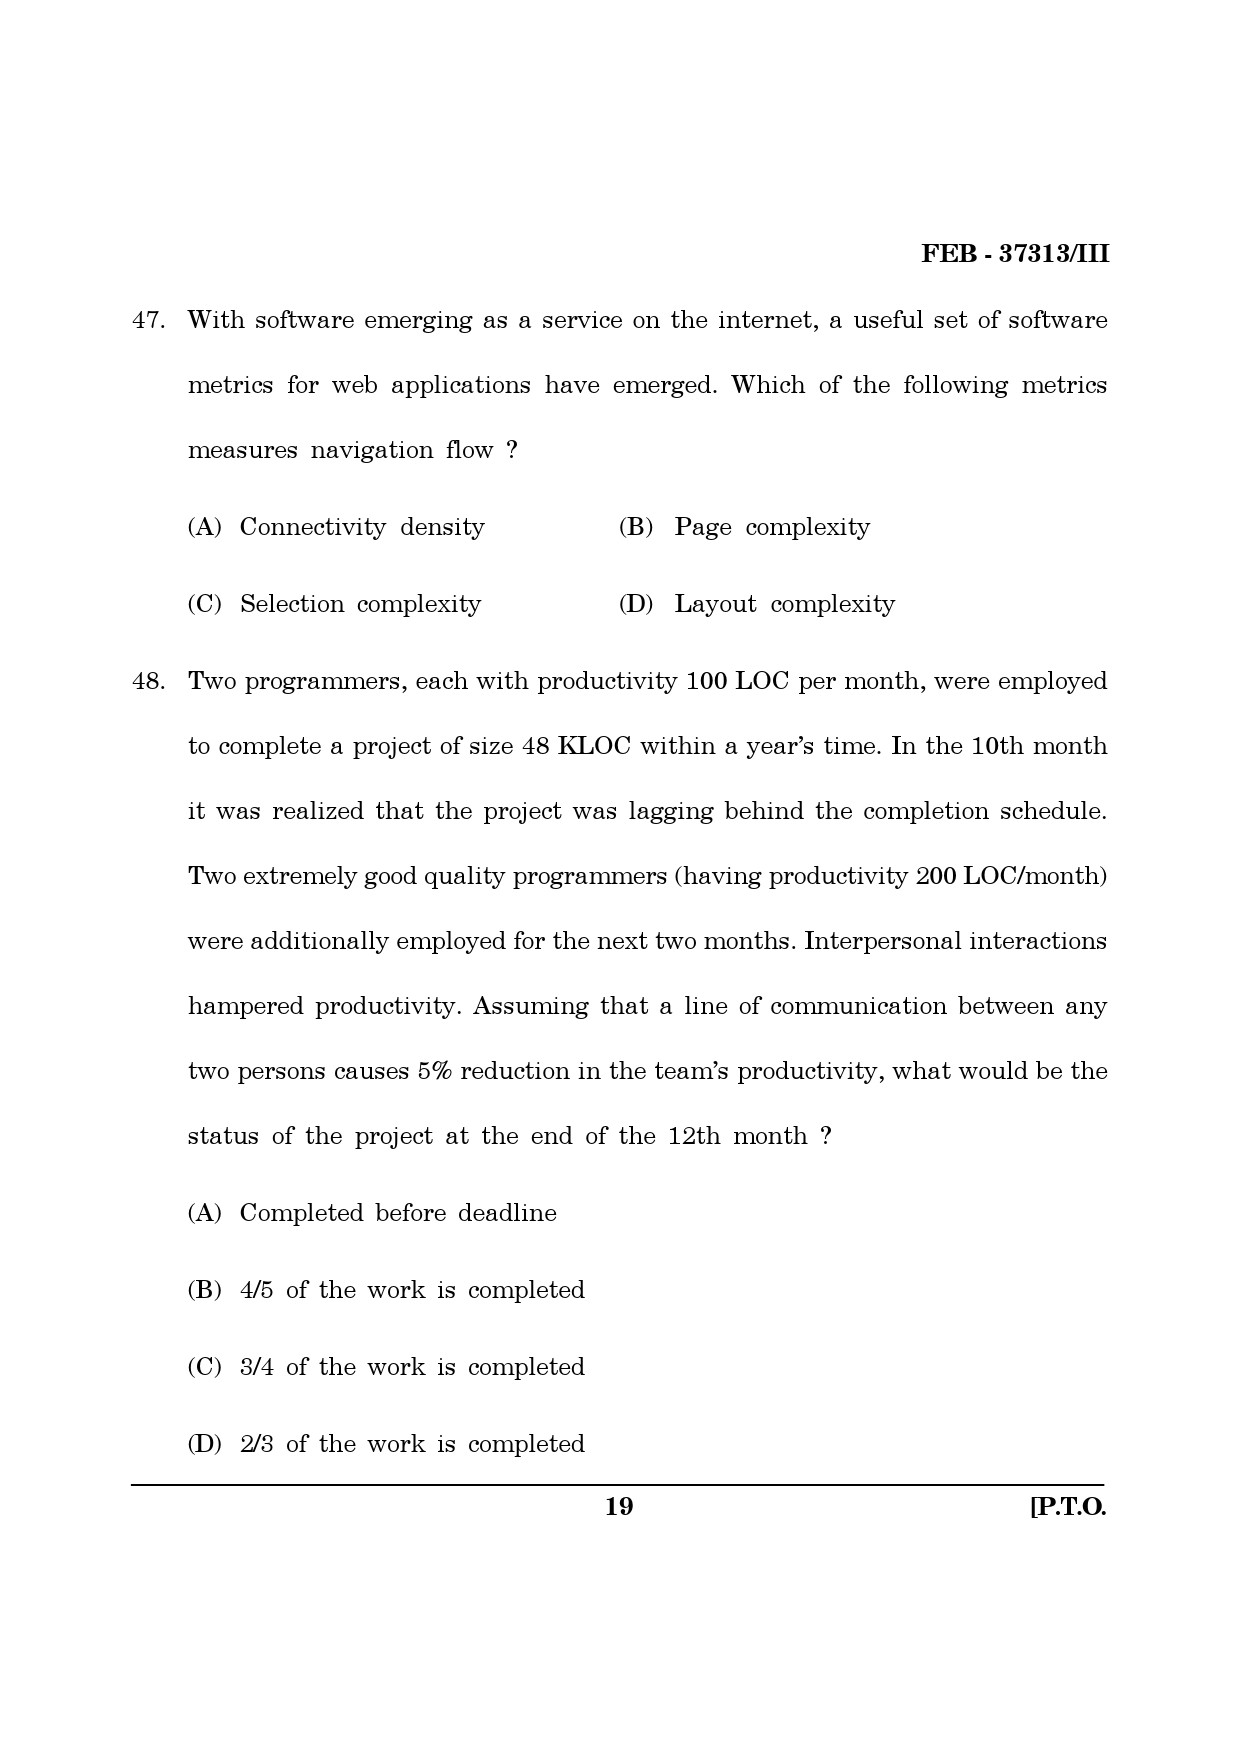 Maharashtra SET Computer Science and Application Question Paper III February 2013 19